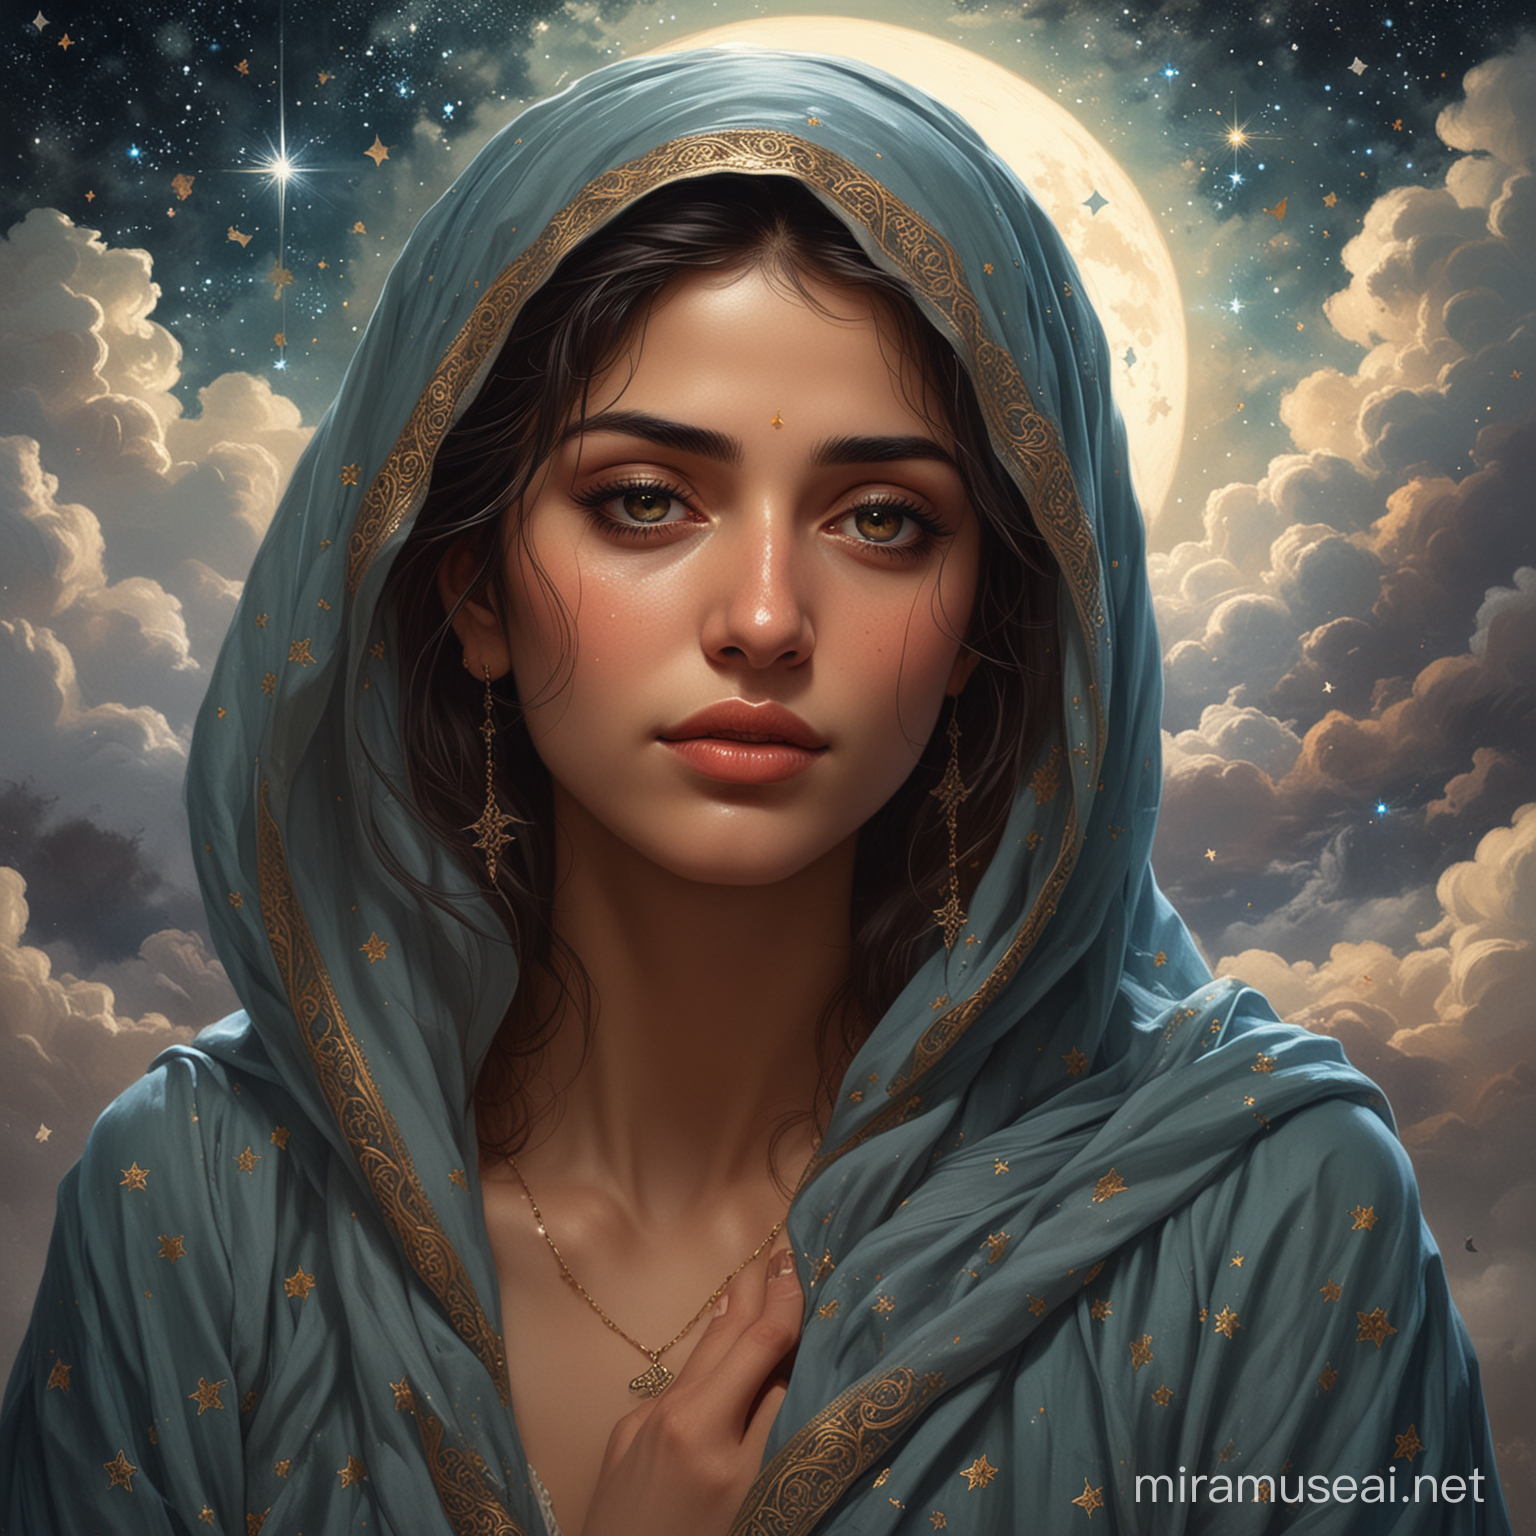 Persian Woman Reflecting Under Cloudy Skies Emotional Portrait Inspired by Persian Poetry